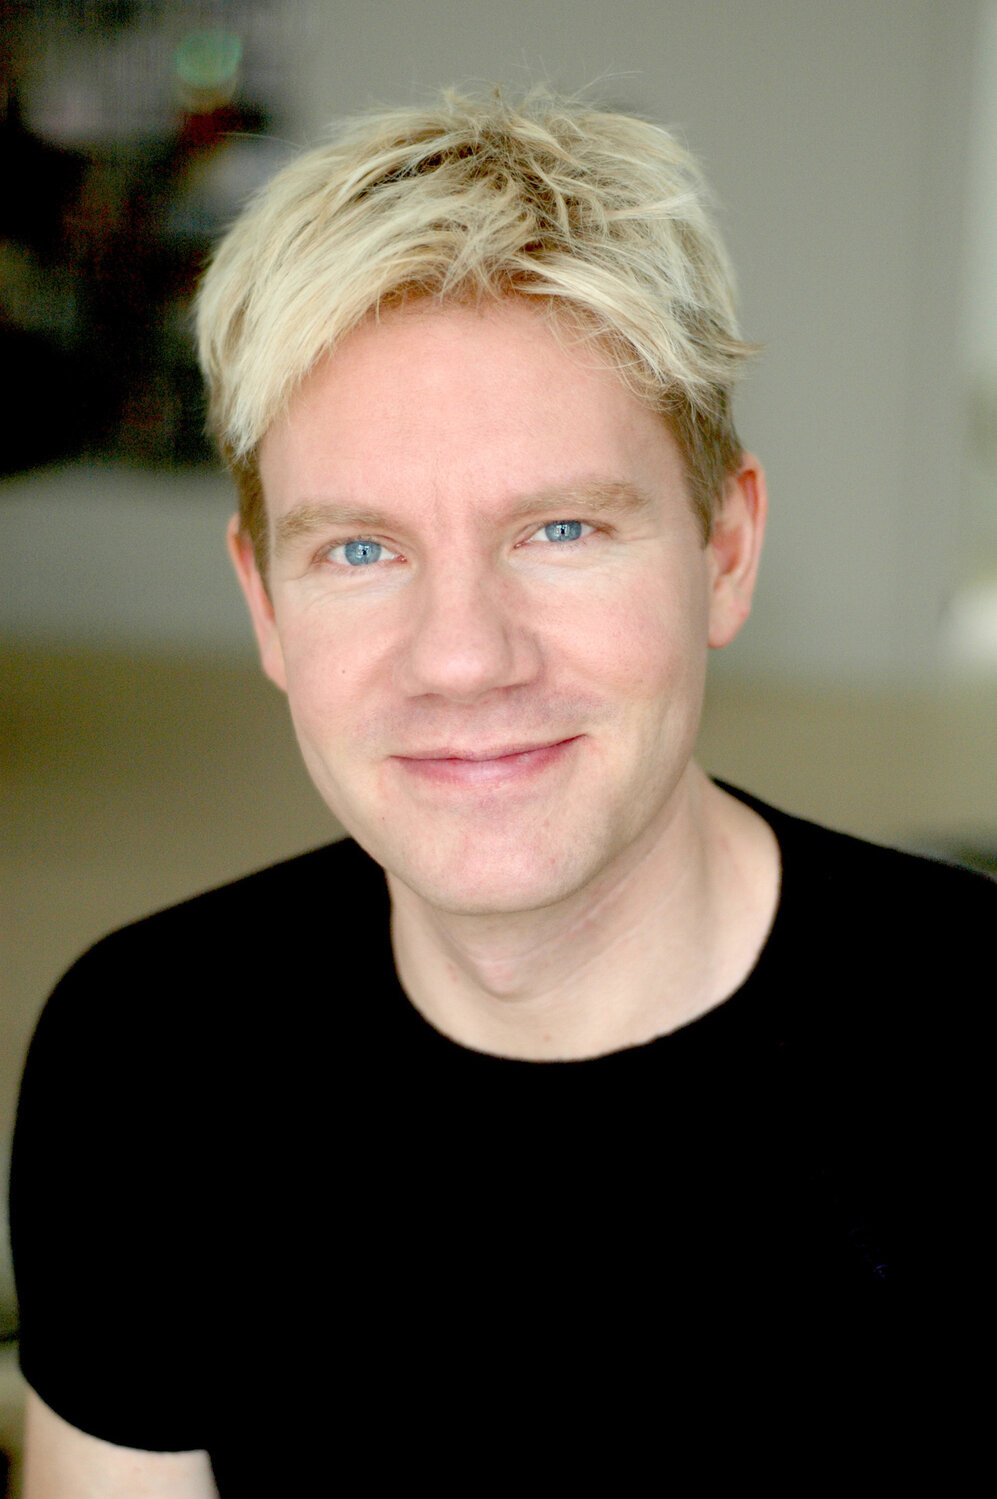 Lomborg: The No. 1 cause of death worldwide – heart disease